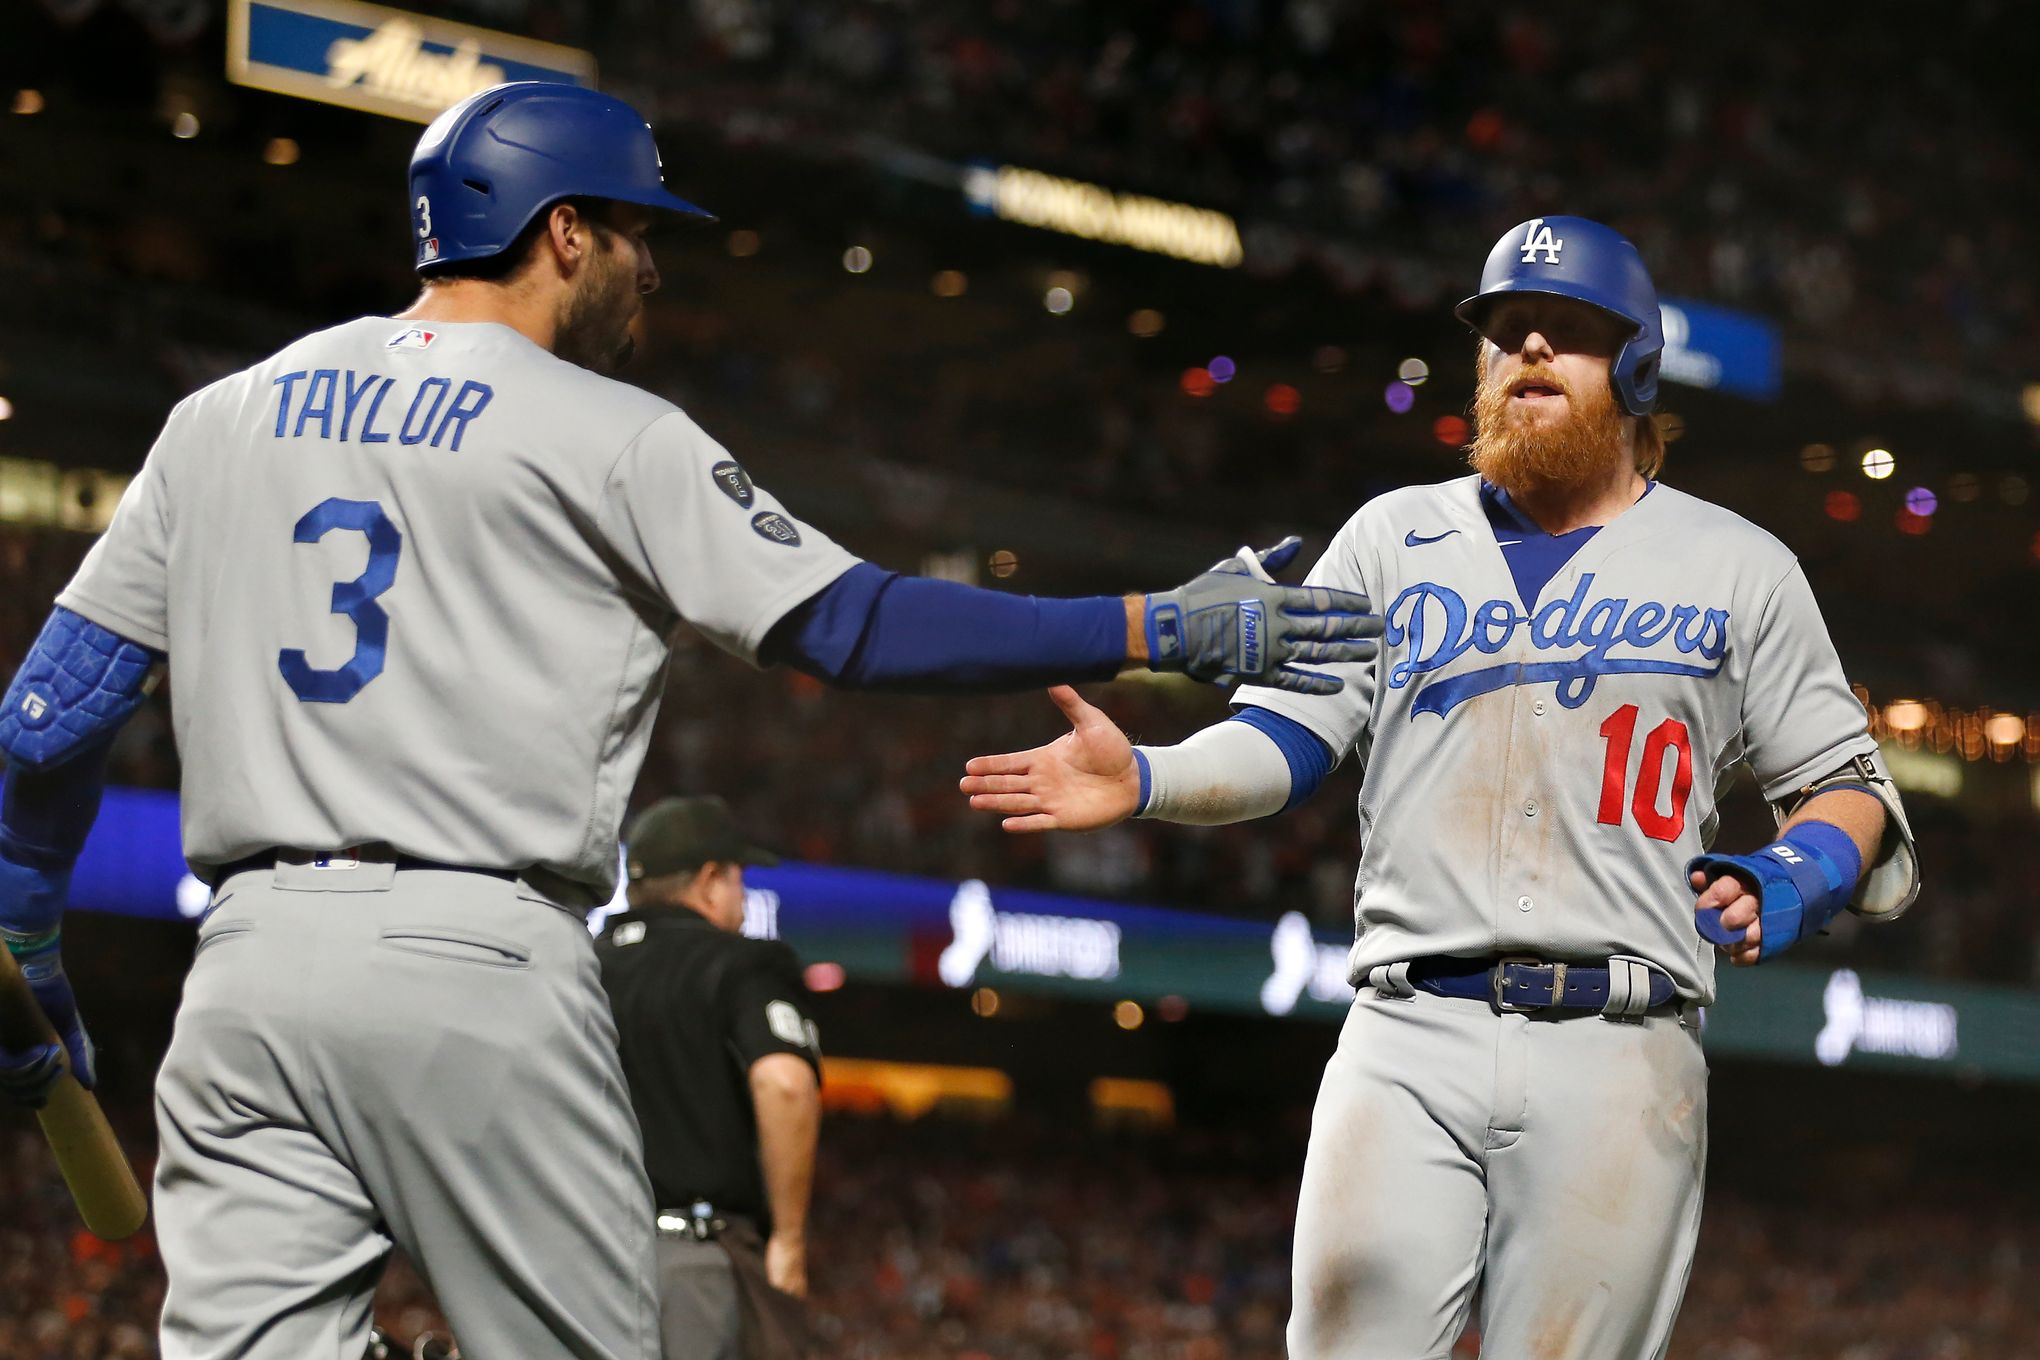 Justin Turner scratched with neck injury for Dodgers